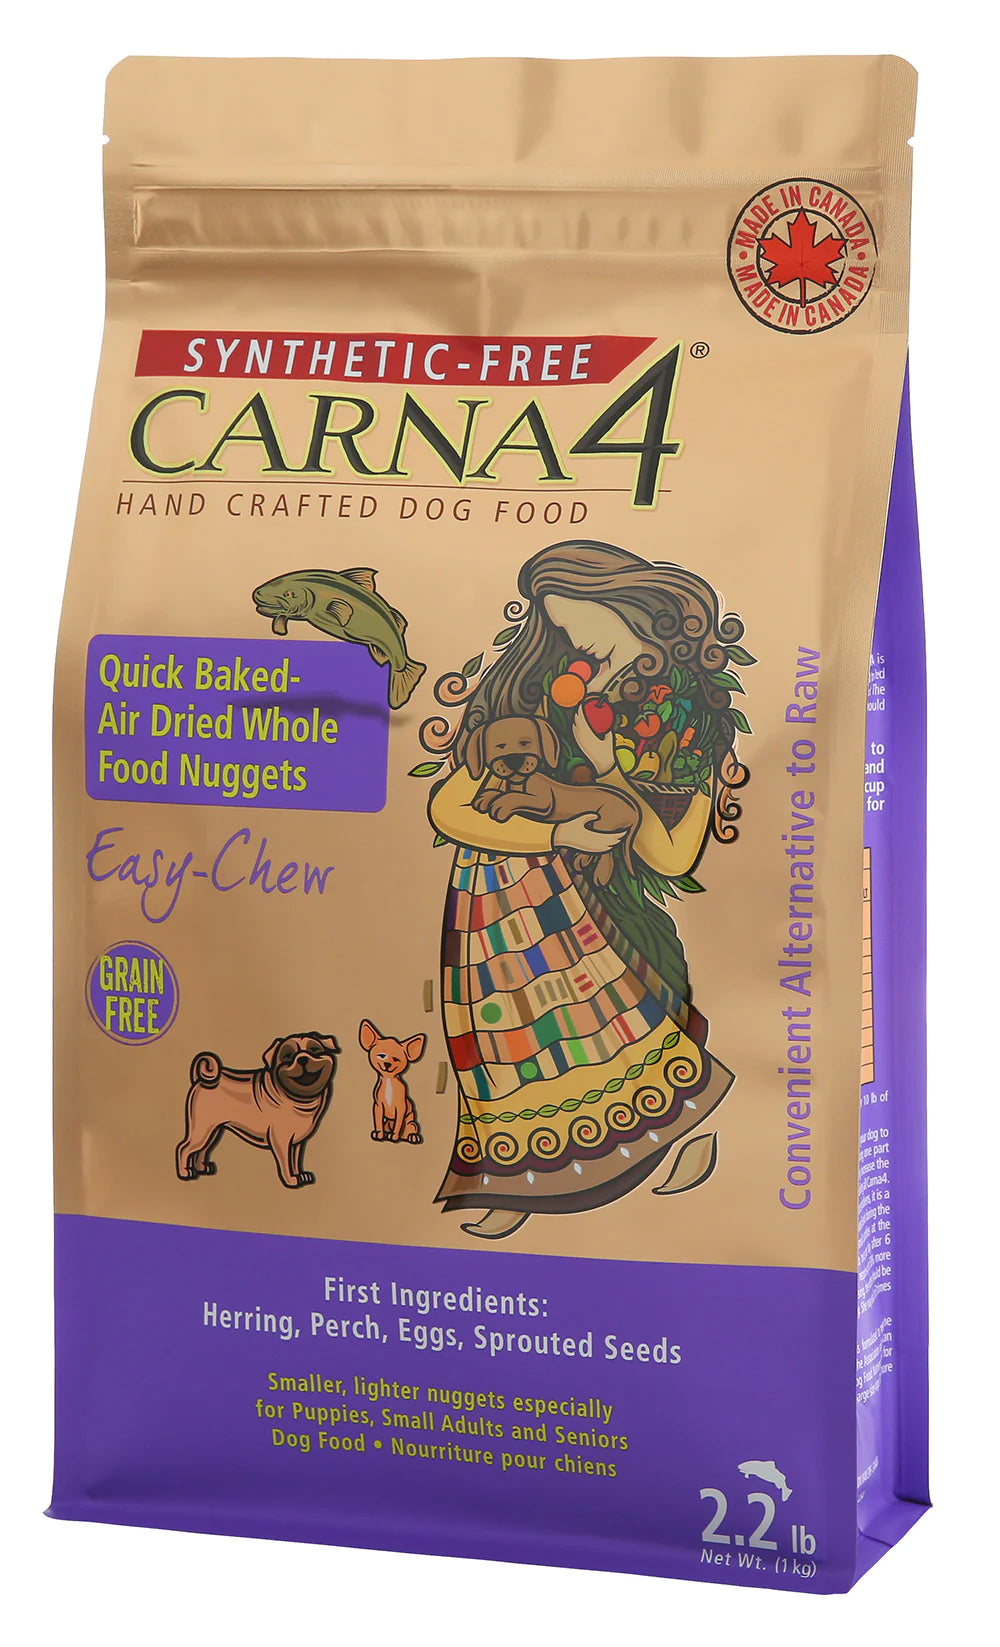 Carna4 - Quick Baked - Air Dried Whole Food Nuggets - Fish